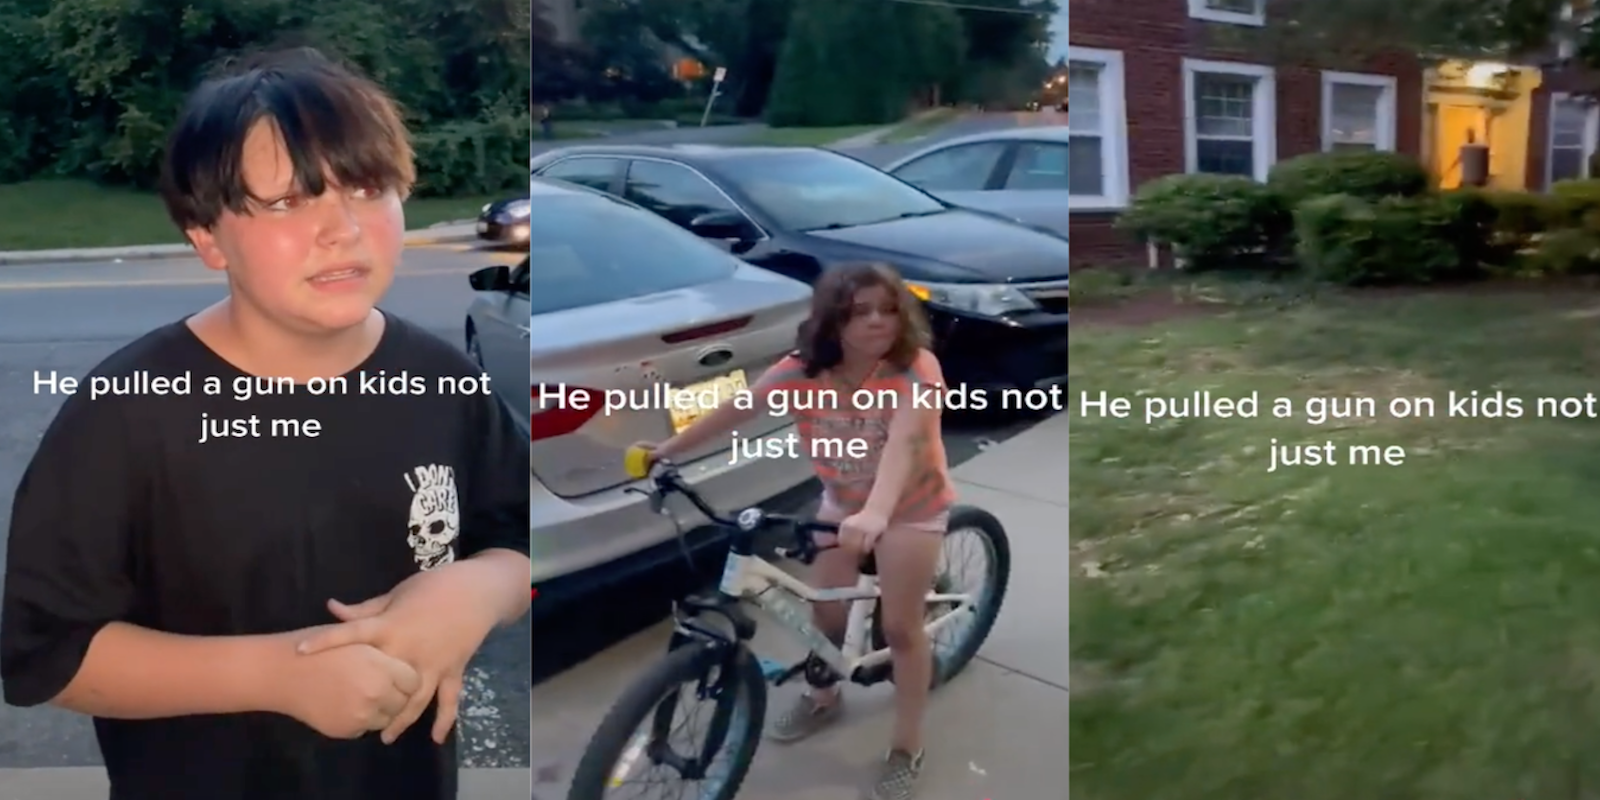 Three panel screenshot from a TikTok where a boy and girl allegedly attacked a man's daughter after which the man pulled a gun on the children